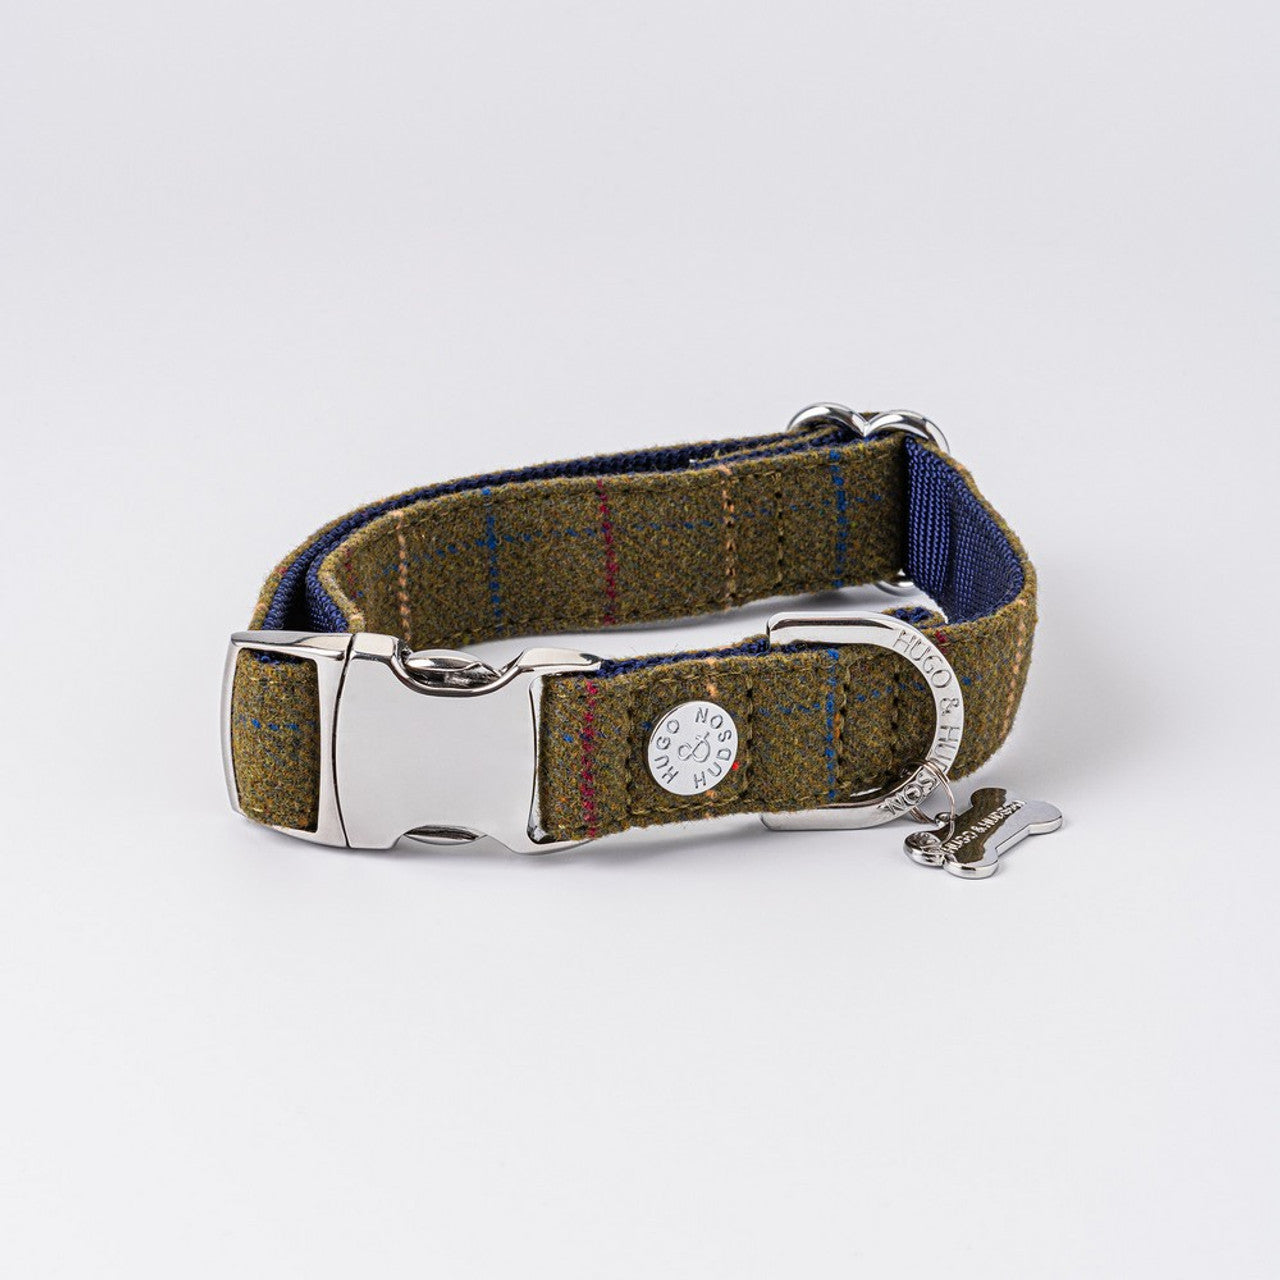 Hugo and Hudson Dark Green Tweed Dog Collar   This beautiful dark green checked tweed collar is from the Hugo and Hudson premium fabric collection.